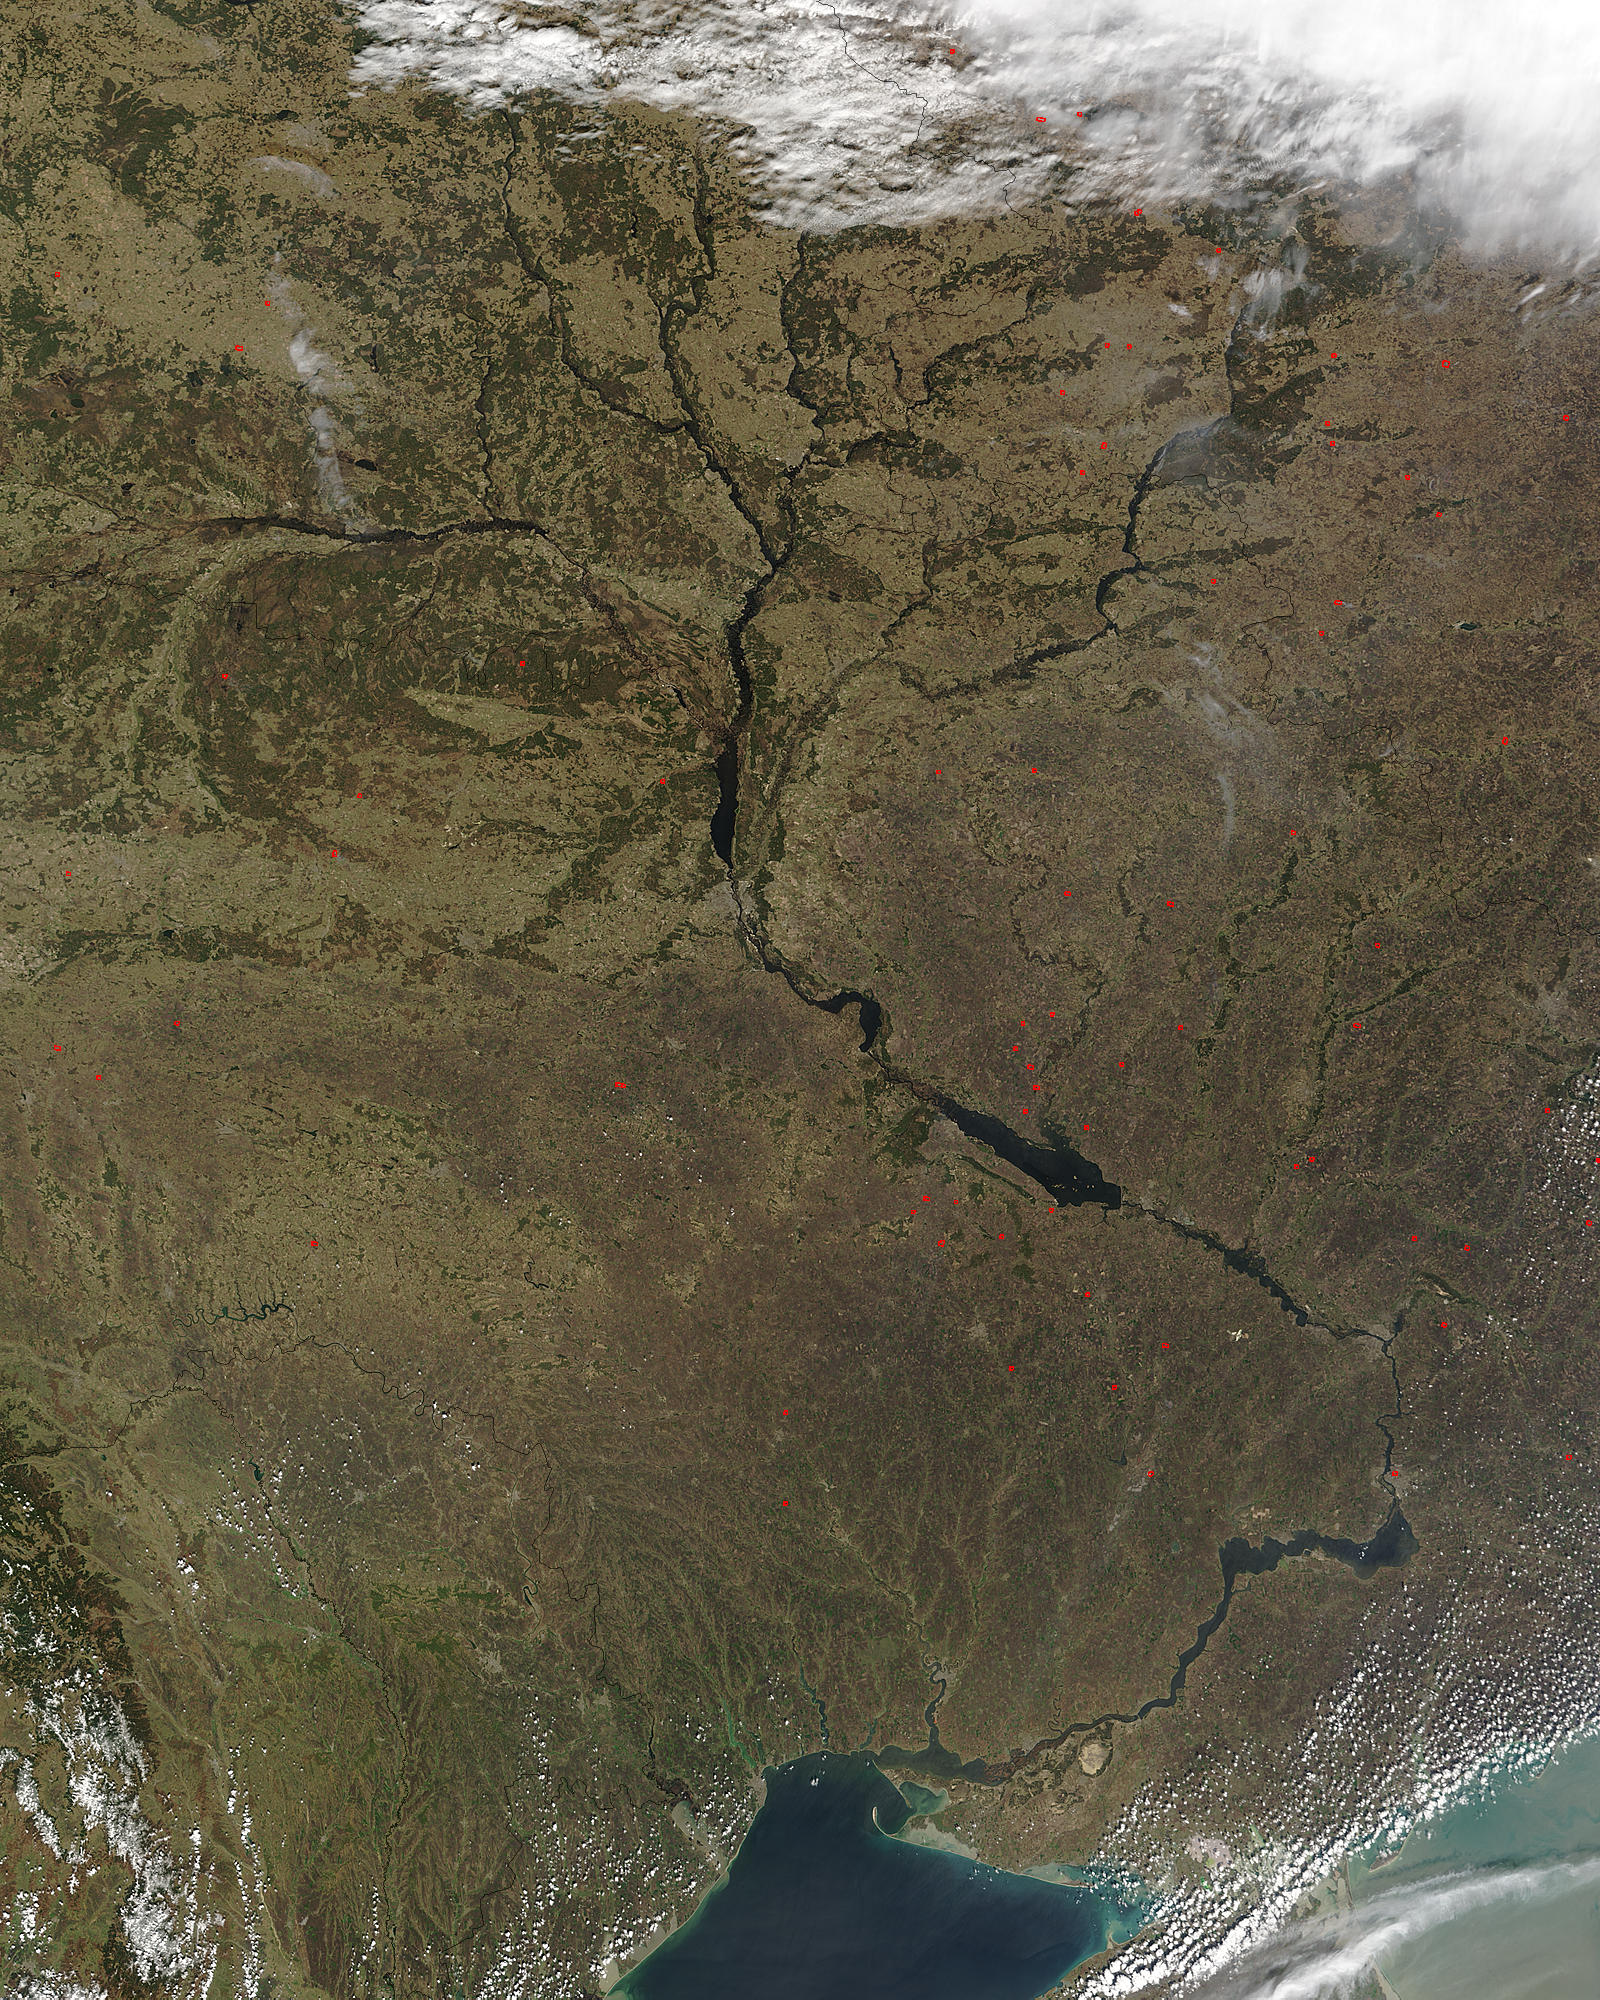 The Dnepr River and its tributaries, Ukraine - related image preview